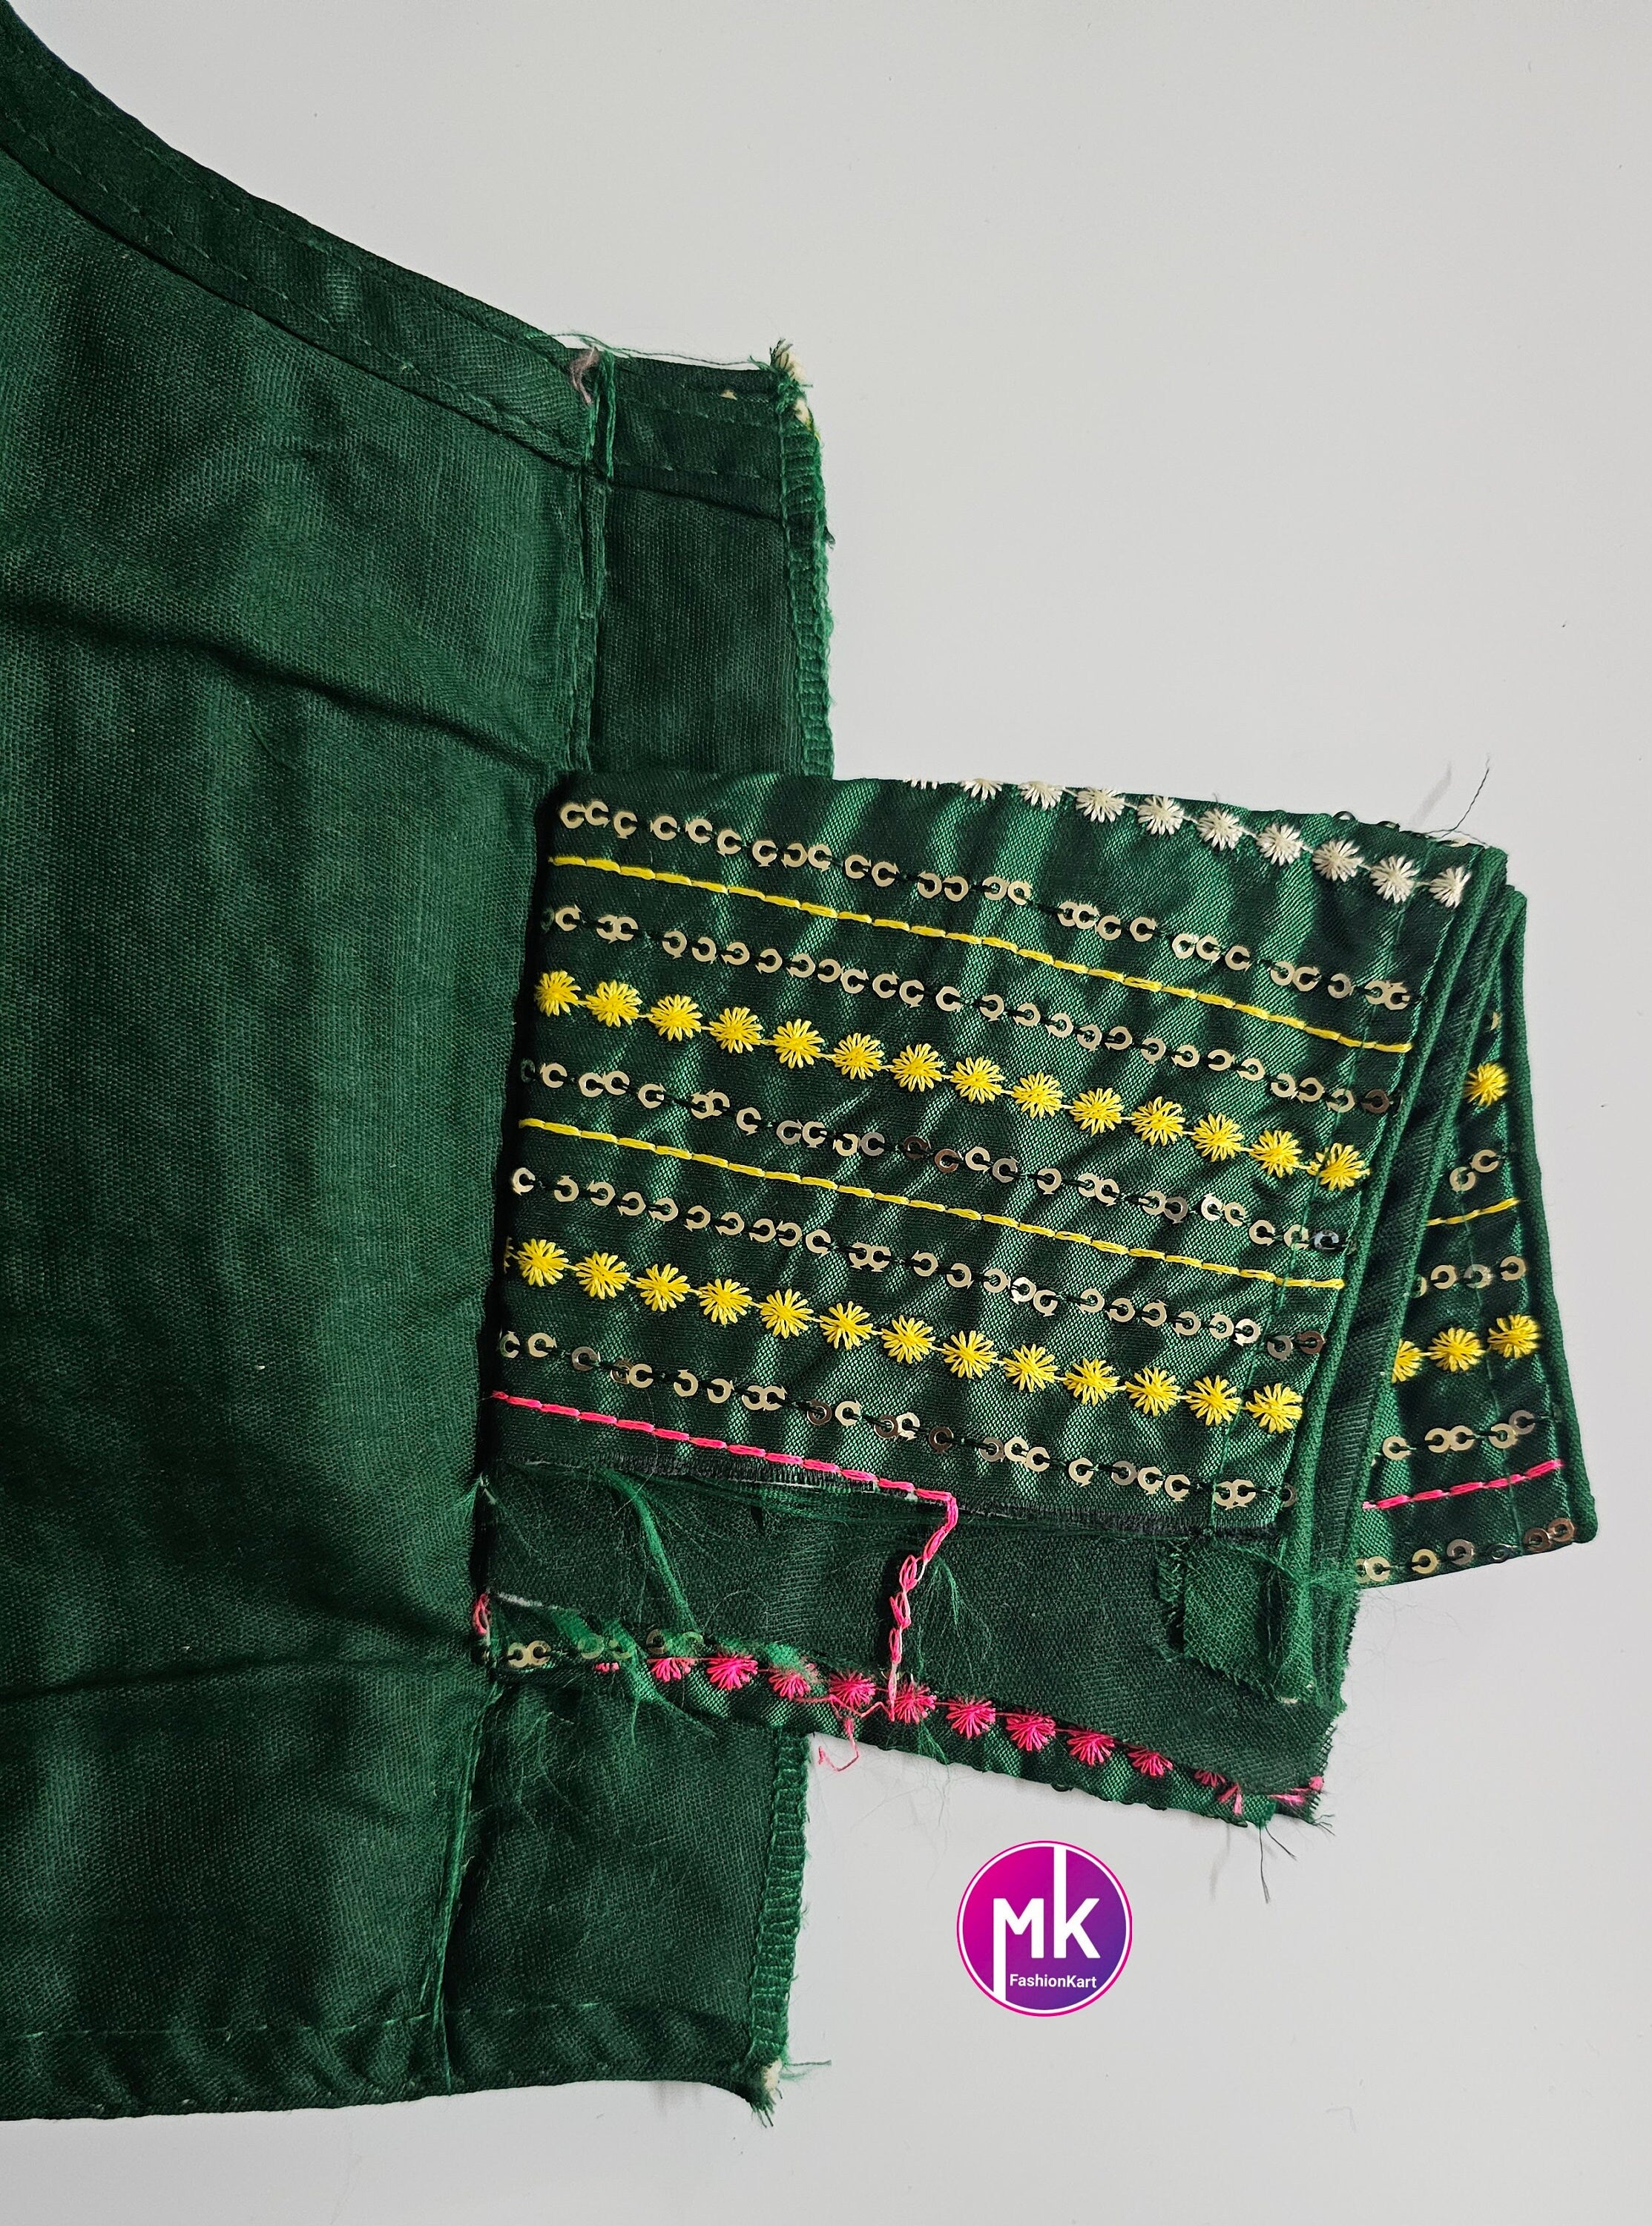 Readymade Saree Blouse - Green with multi-color embroidered and sequence work blouse - Princess cut padded - size 38" (Upto 40")